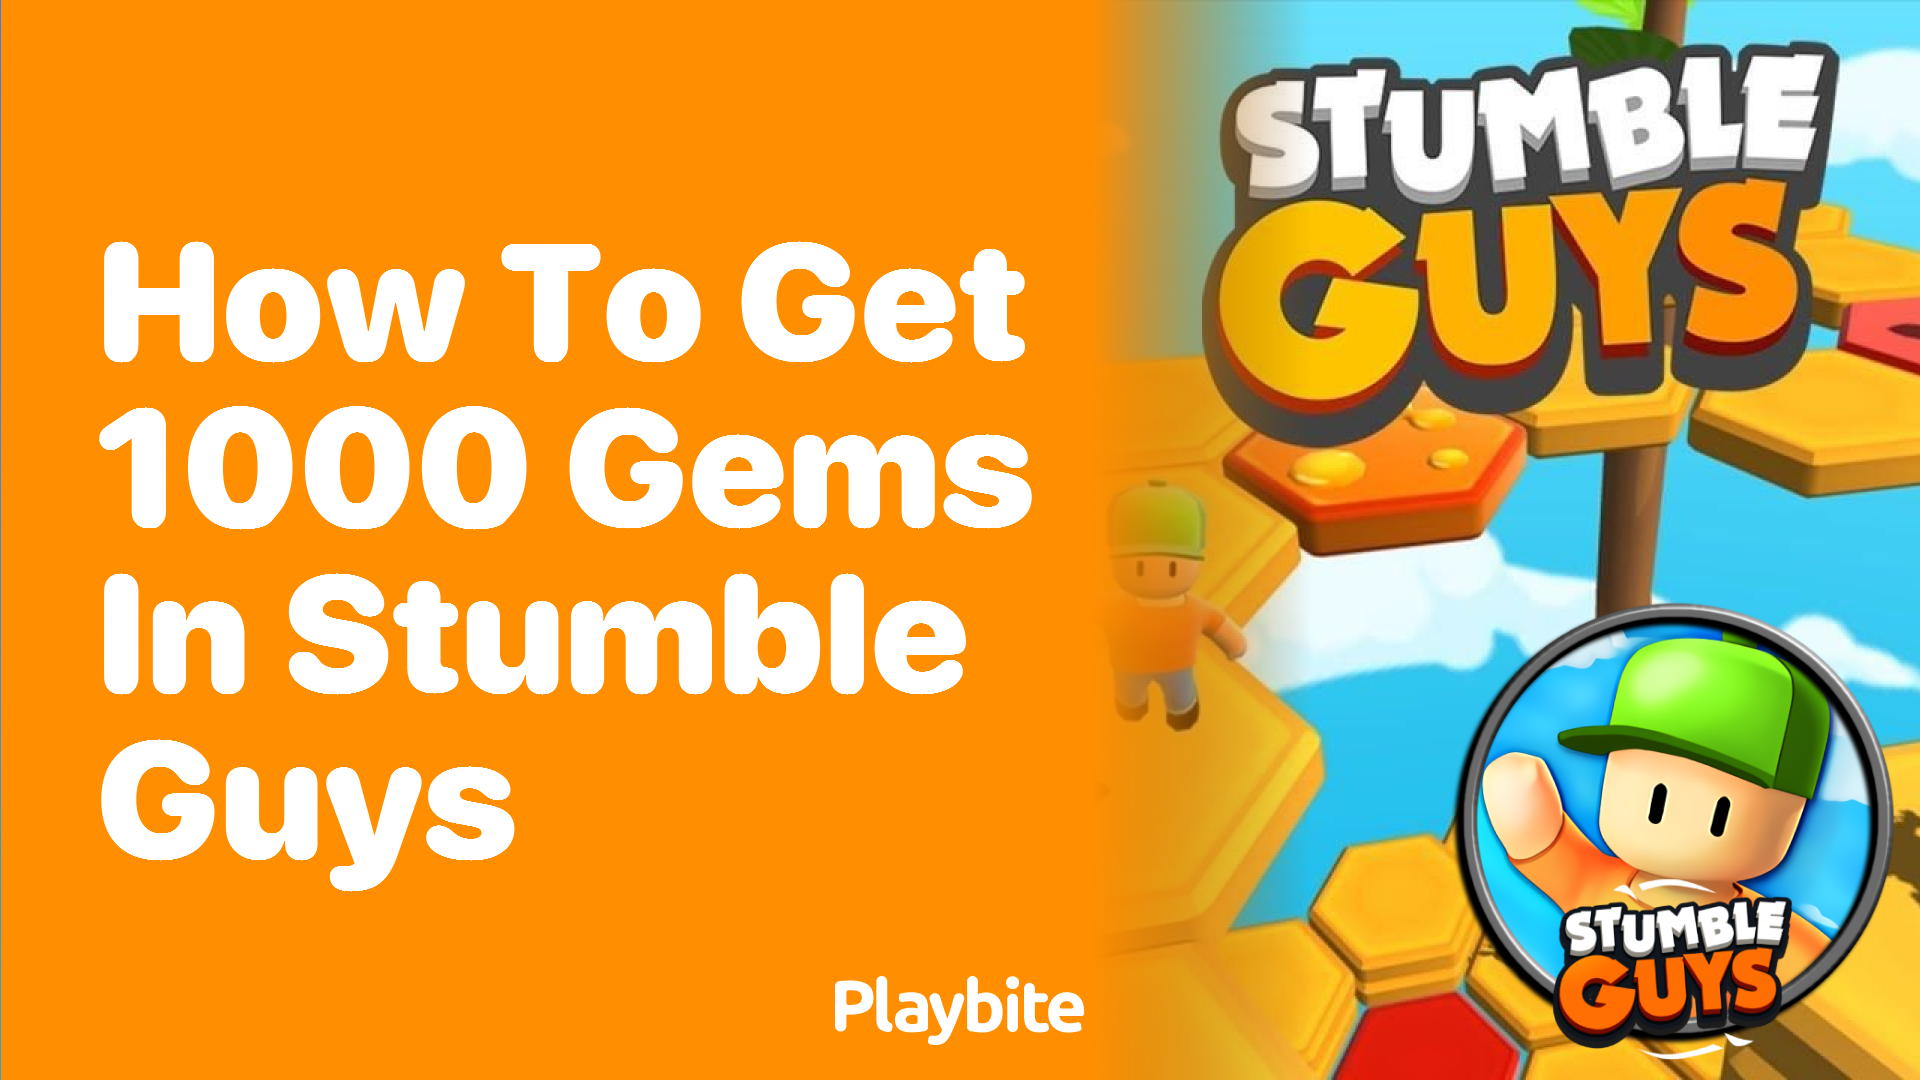 How to Get 1000 Gems in Stumble Guys